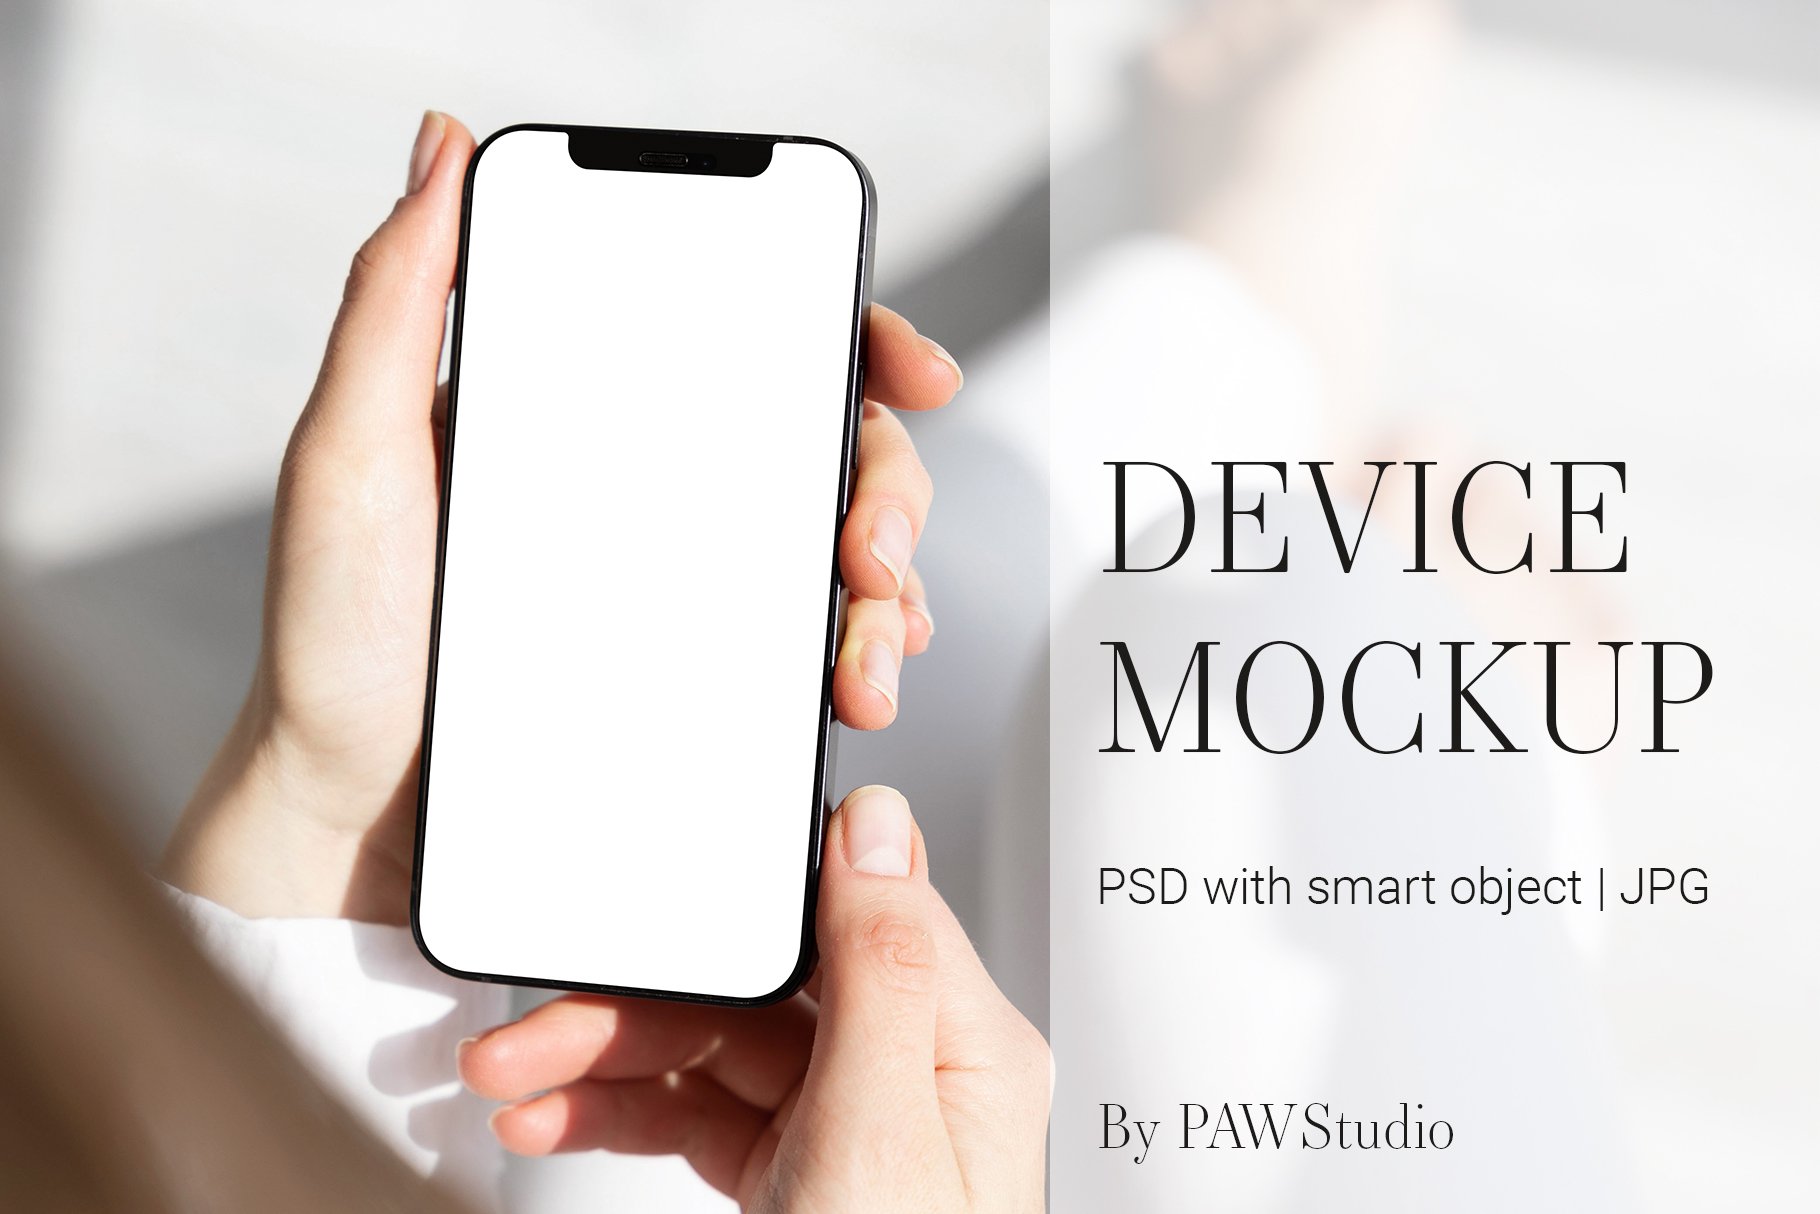 Iphone Mockup, Mobile Device Mockup cover image.